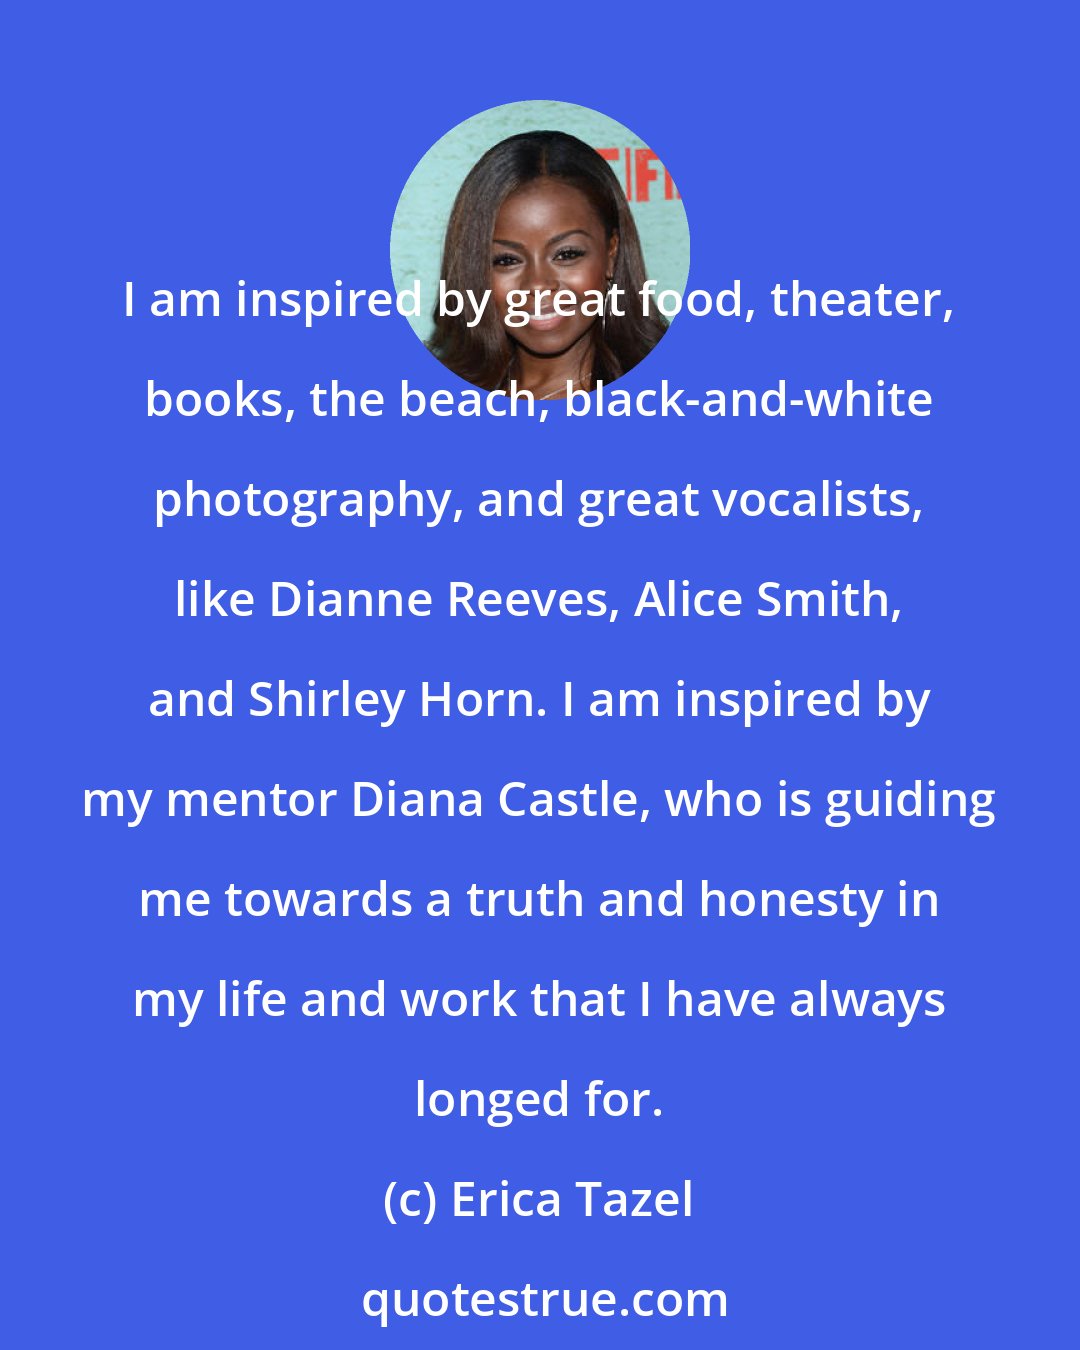 Erica Tazel: I am inspired by great food, theater, books, the beach, black-and-white photography, and great vocalists, like Dianne Reeves, Alice Smith, and Shirley Horn. I am inspired by my mentor Diana Castle, who is guiding me towards a truth and honesty in my life and work that I have always longed for.